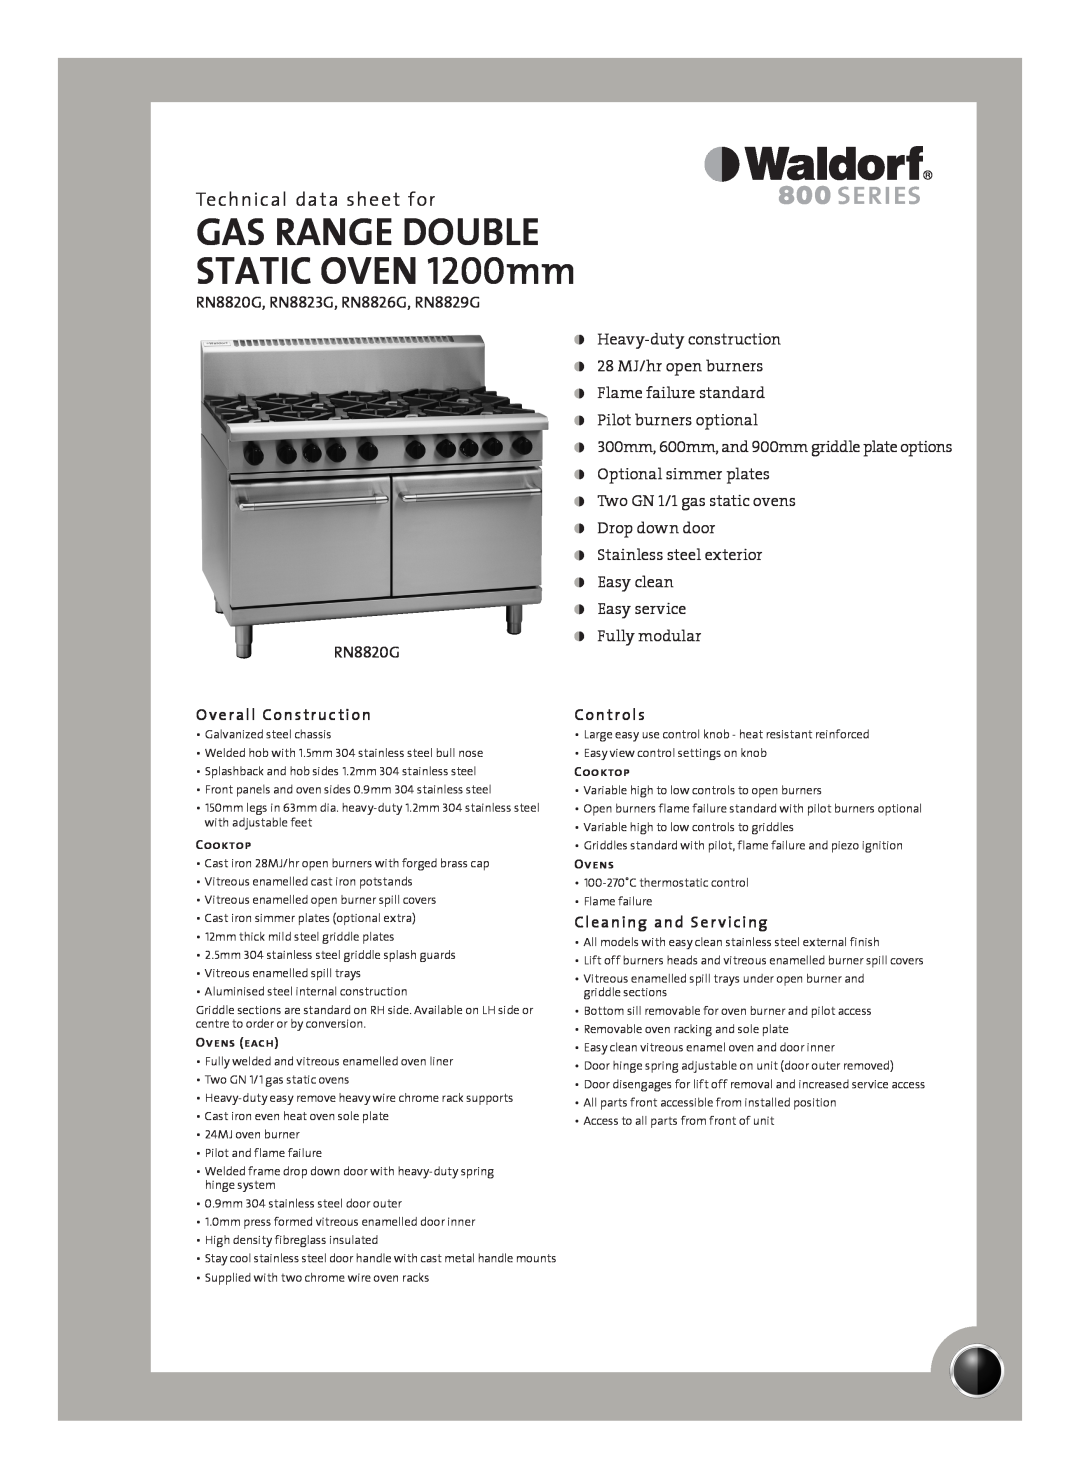 Moffat RN8823G manual Technical data sheet for, Overall Construction, Controls, Cleaning and Ser vicing, Cooktop, Ovens 